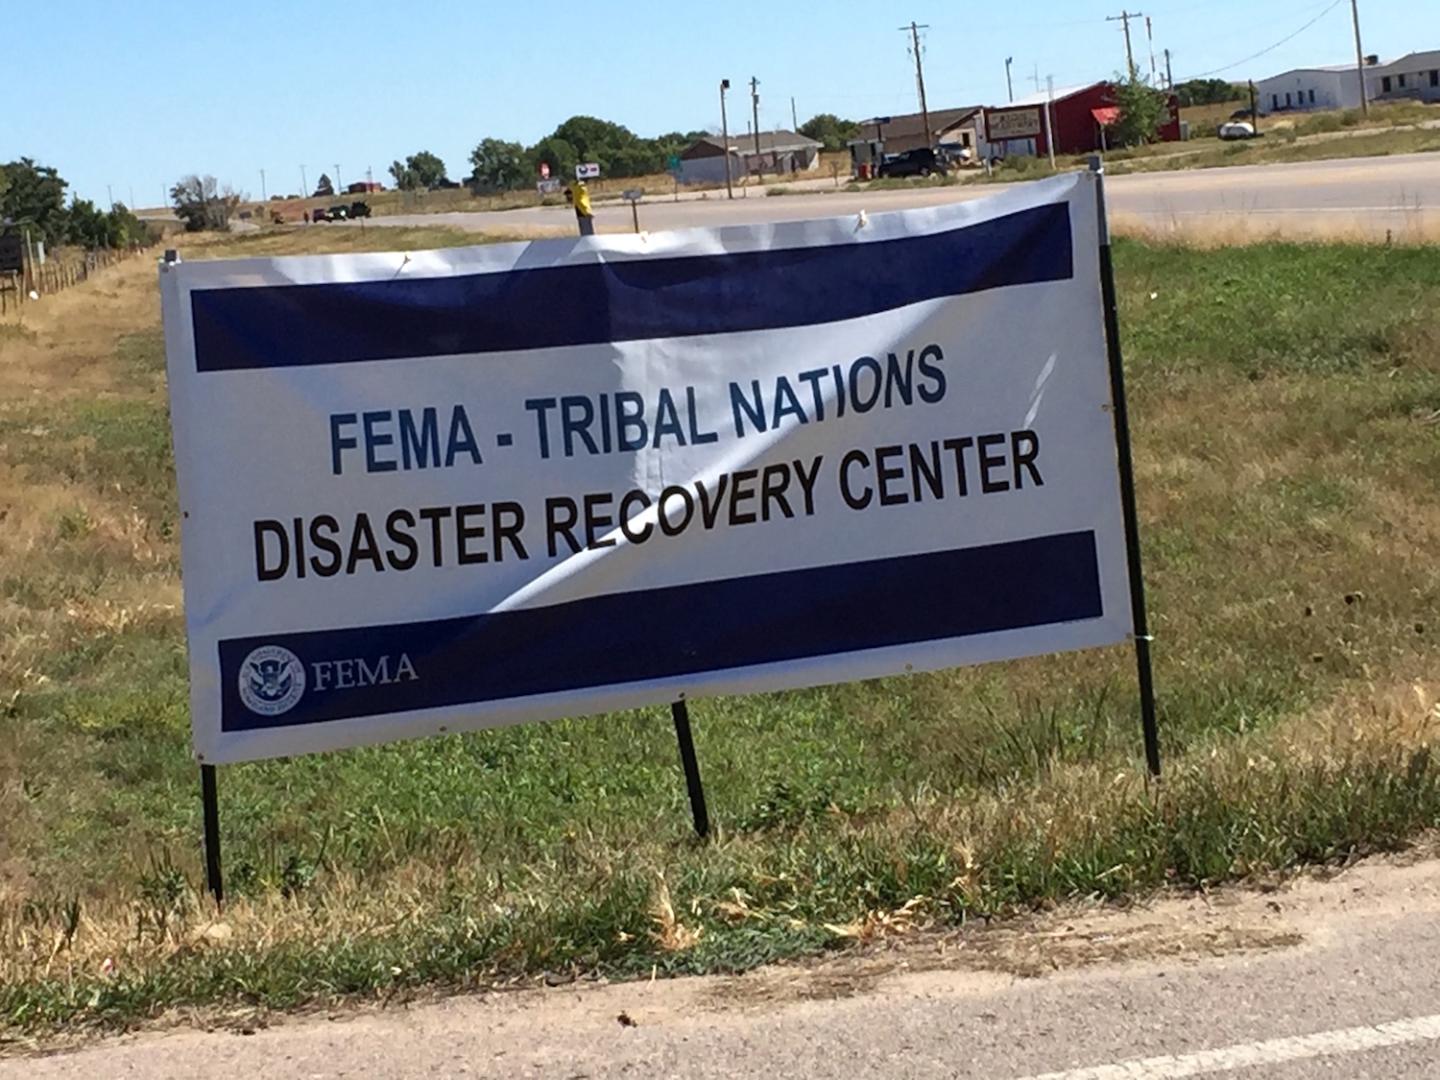 FEMA & Tribal Nations - Disaster Recovery Center sign in town